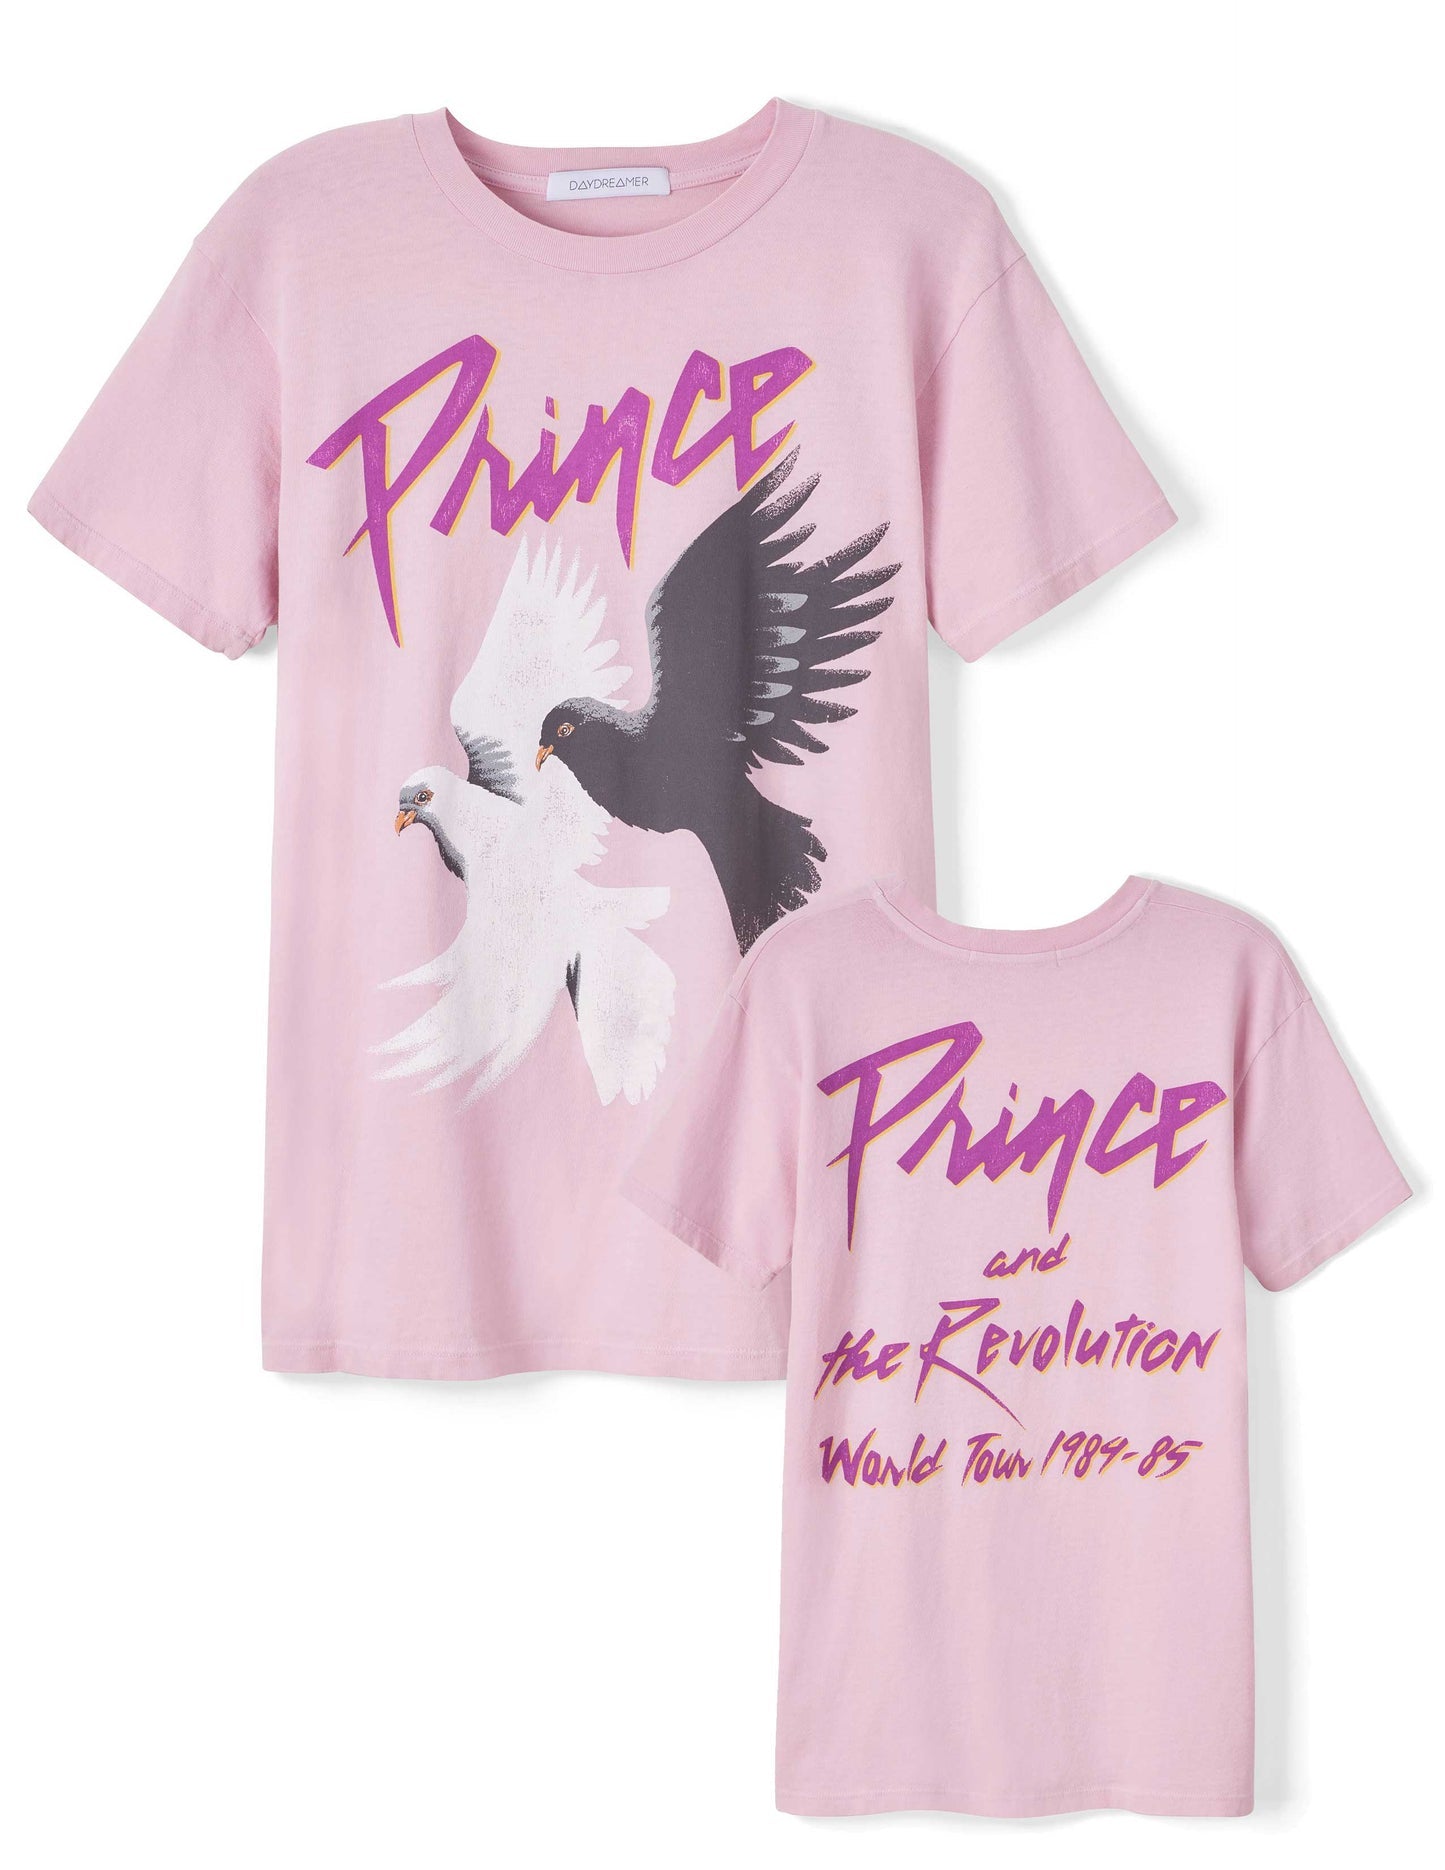 DAYDREAMER PRINCE AND THE REVOLUTION WORLD TOUR TEE - 8586